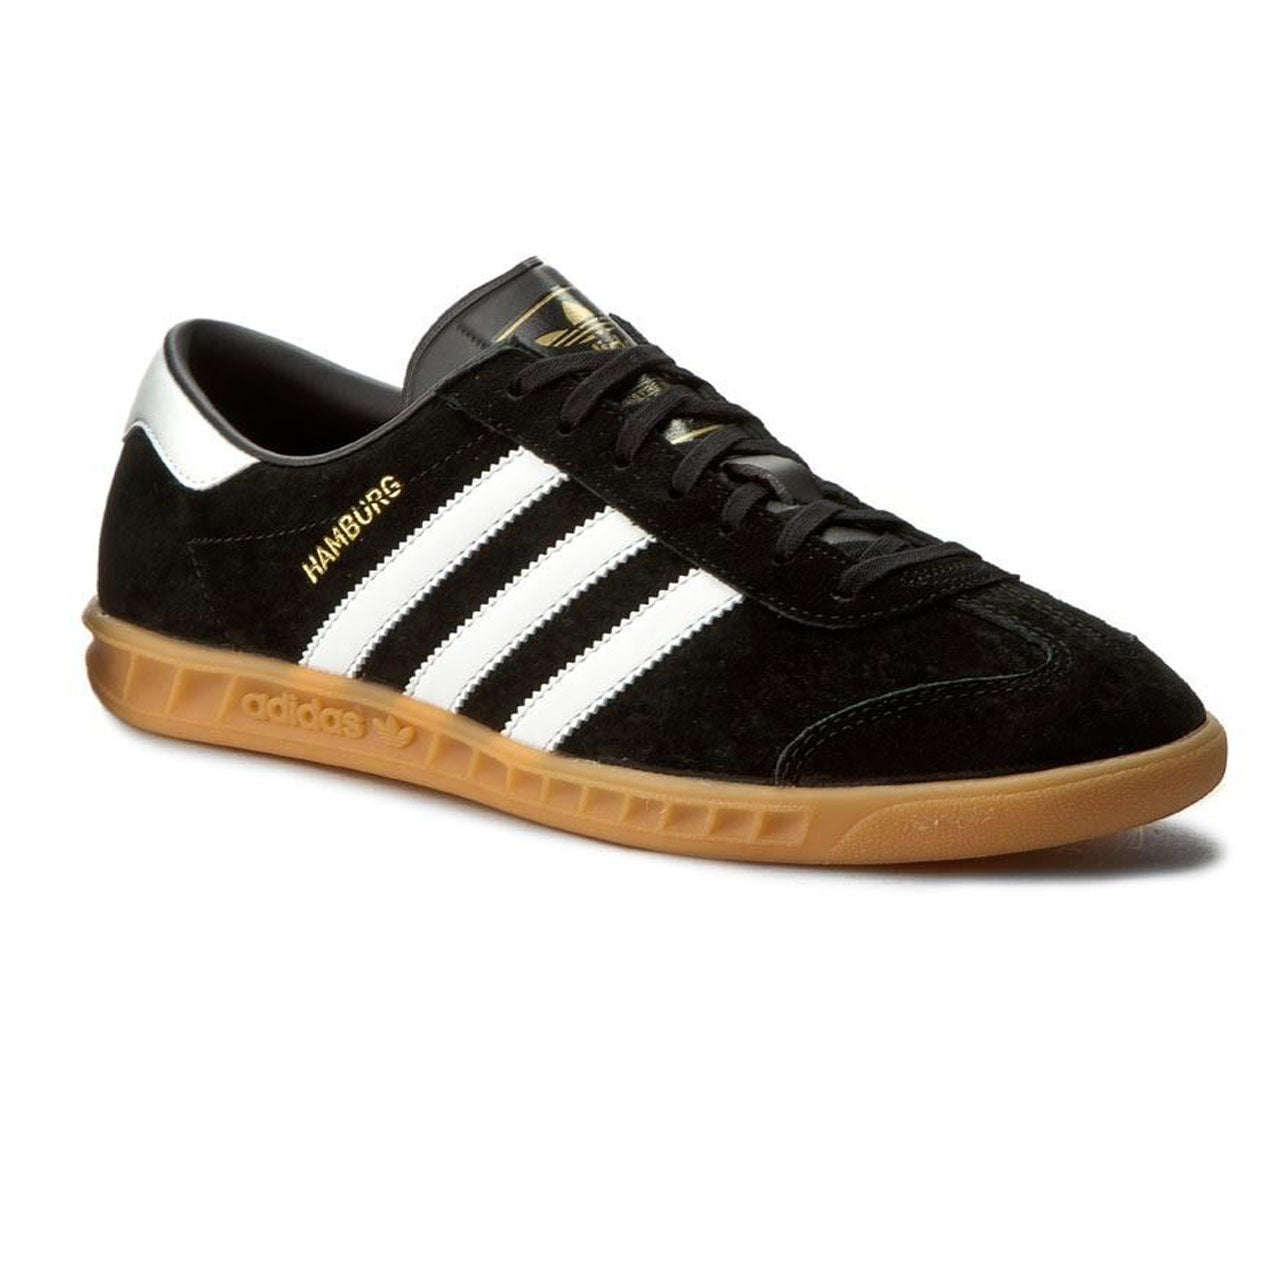 Adidas Hamburg Trainers Mens Black Classic Retro Trainers Suede Gym Trainers - MRGOUTLETS